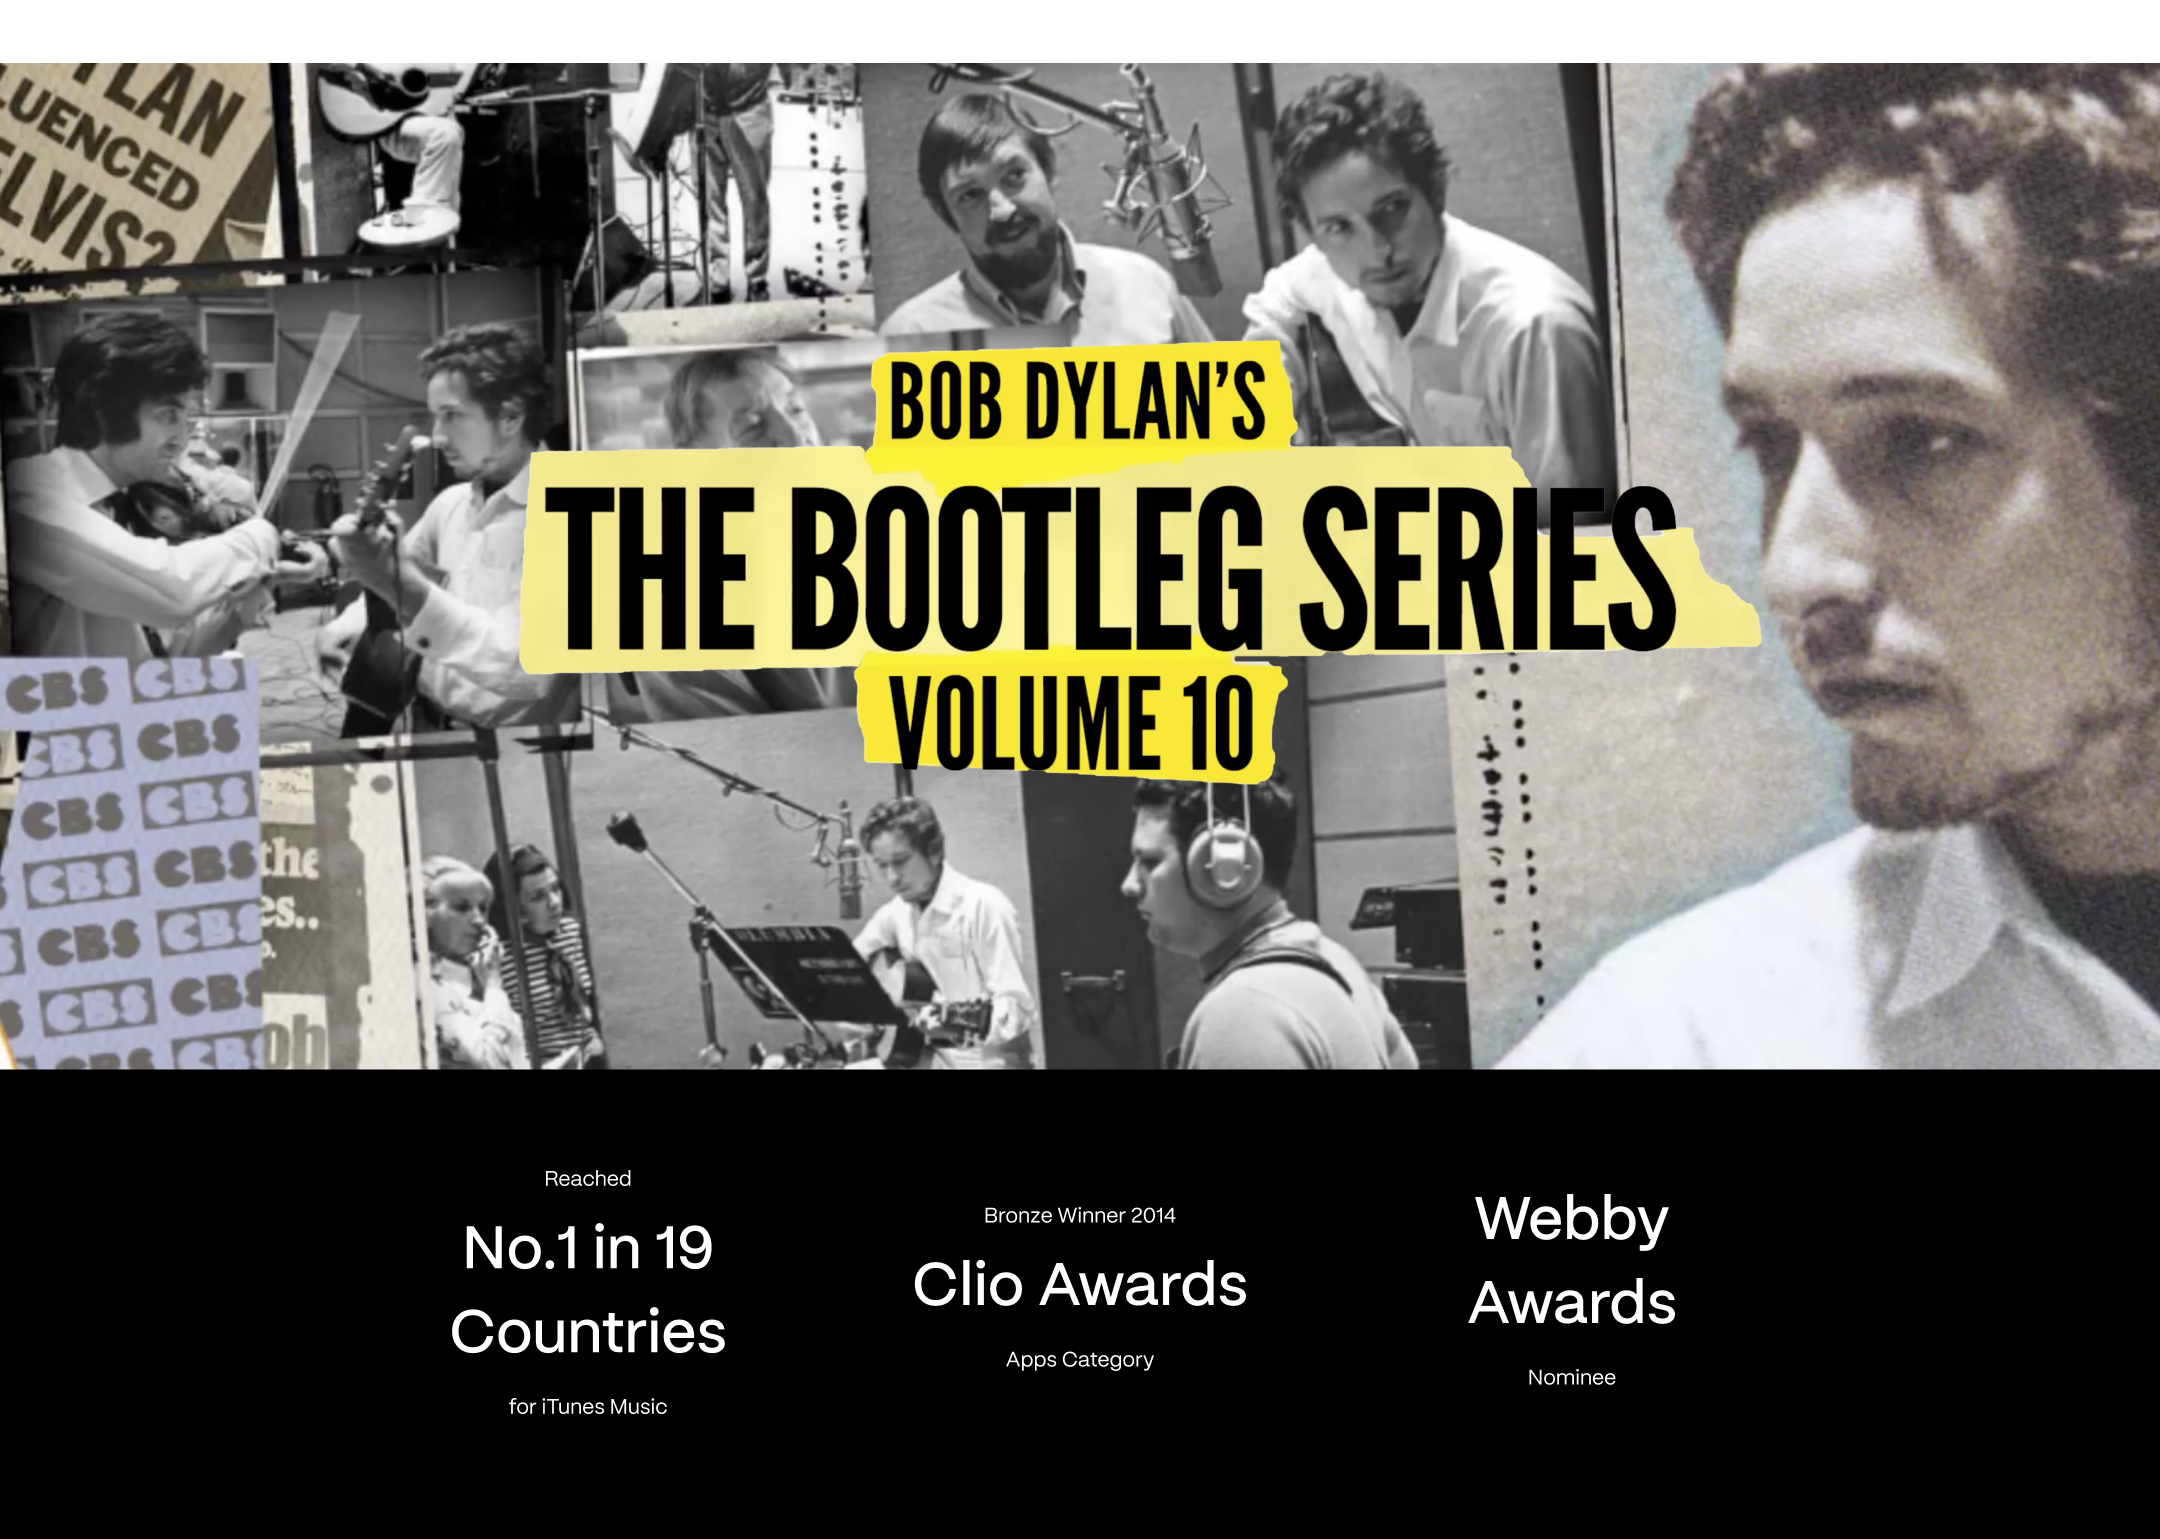 Title of Bob Dylan's The Bootleg Series with a background of a rock-style collage of him with the app's achievements listed.